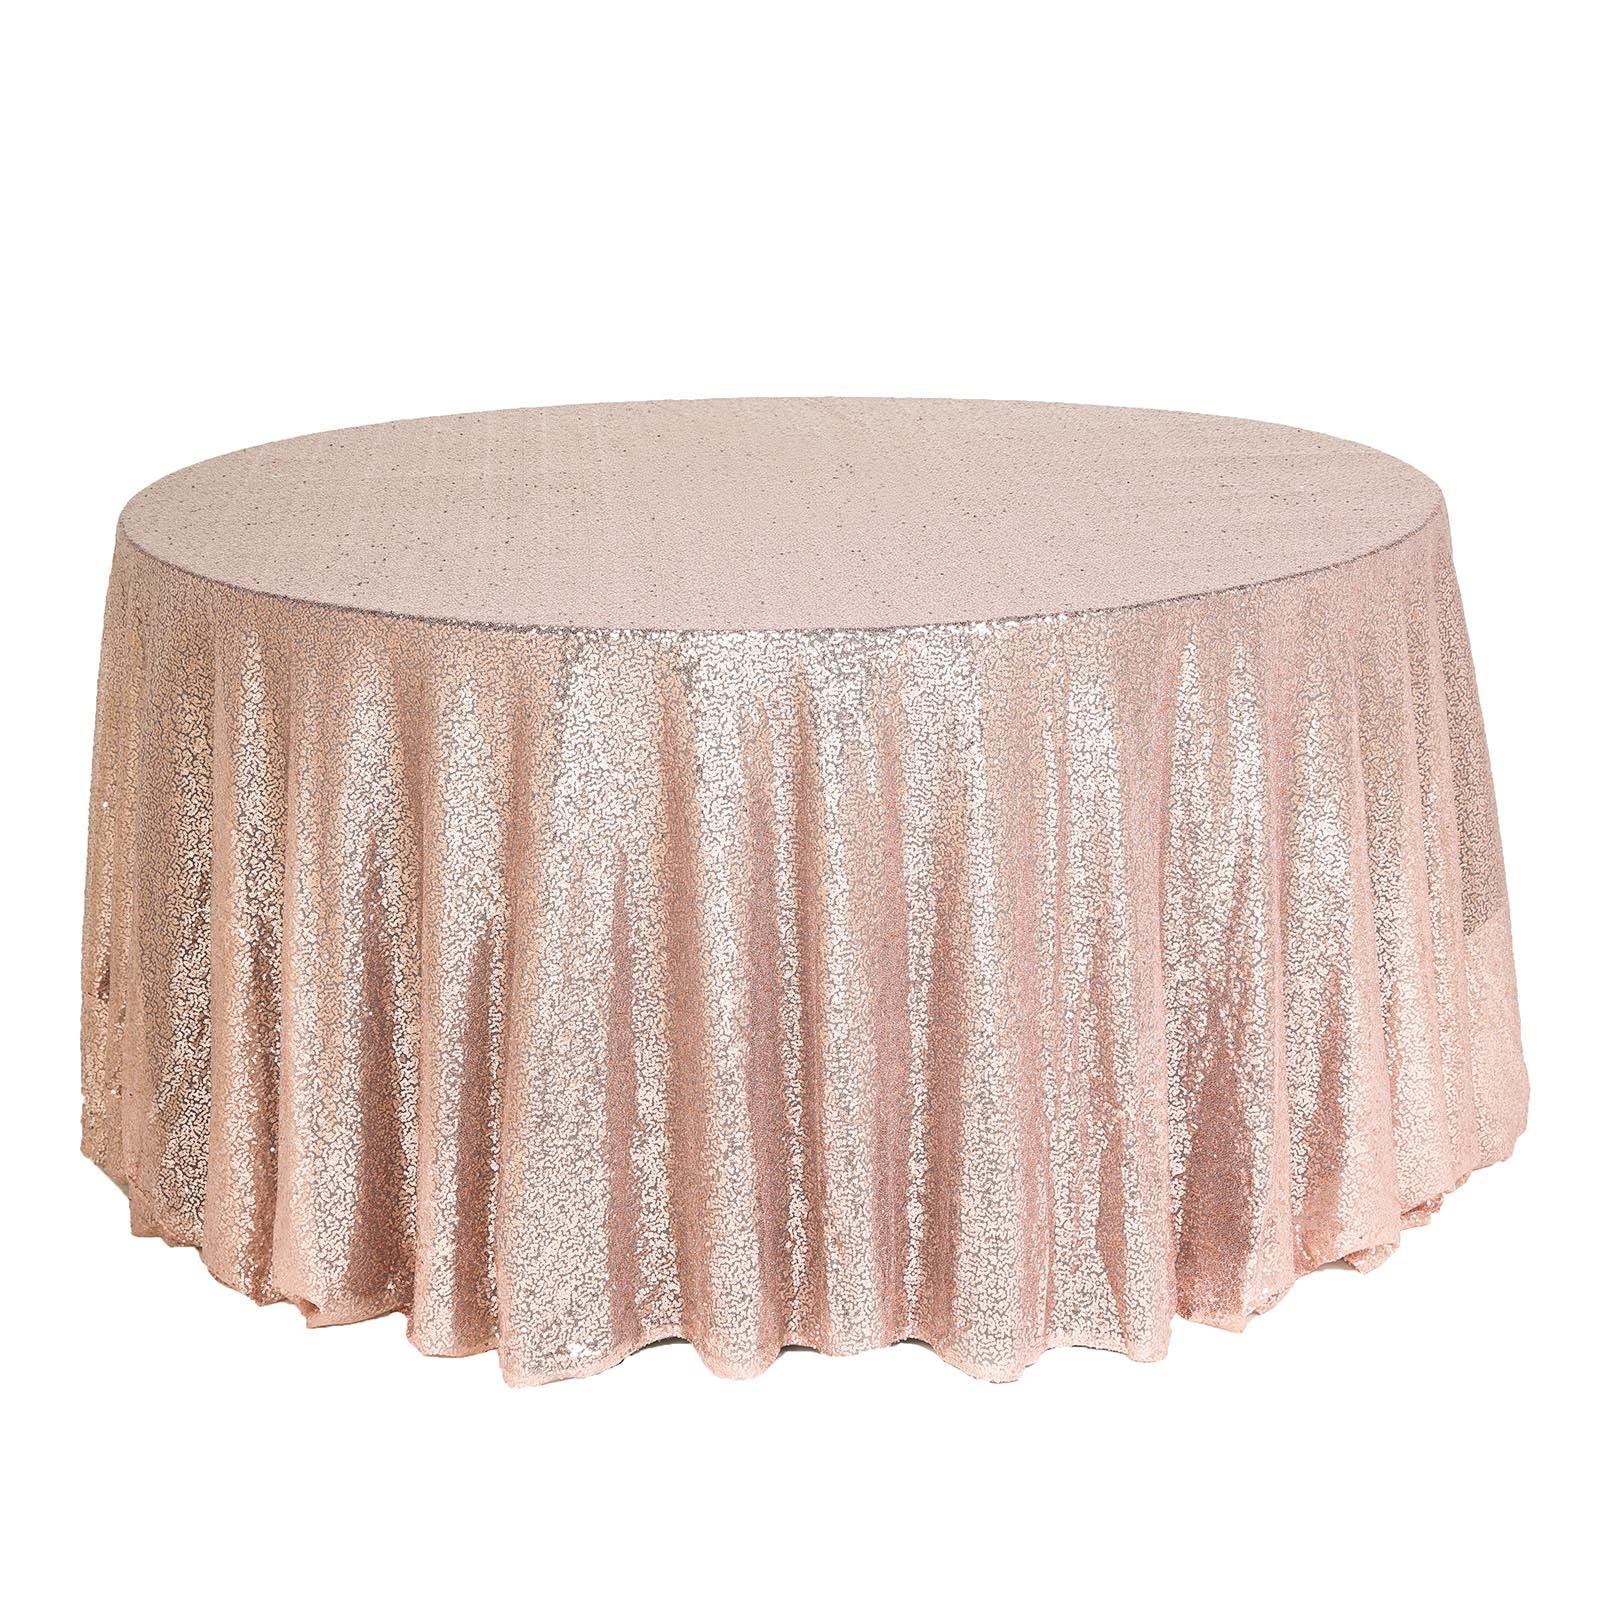 Tableclothsfactory 132" Wholesale Premium Table Cover Sparkly Sequin Round Tablecloth for Wedding Banquet Party Home Decor - Rose Gold